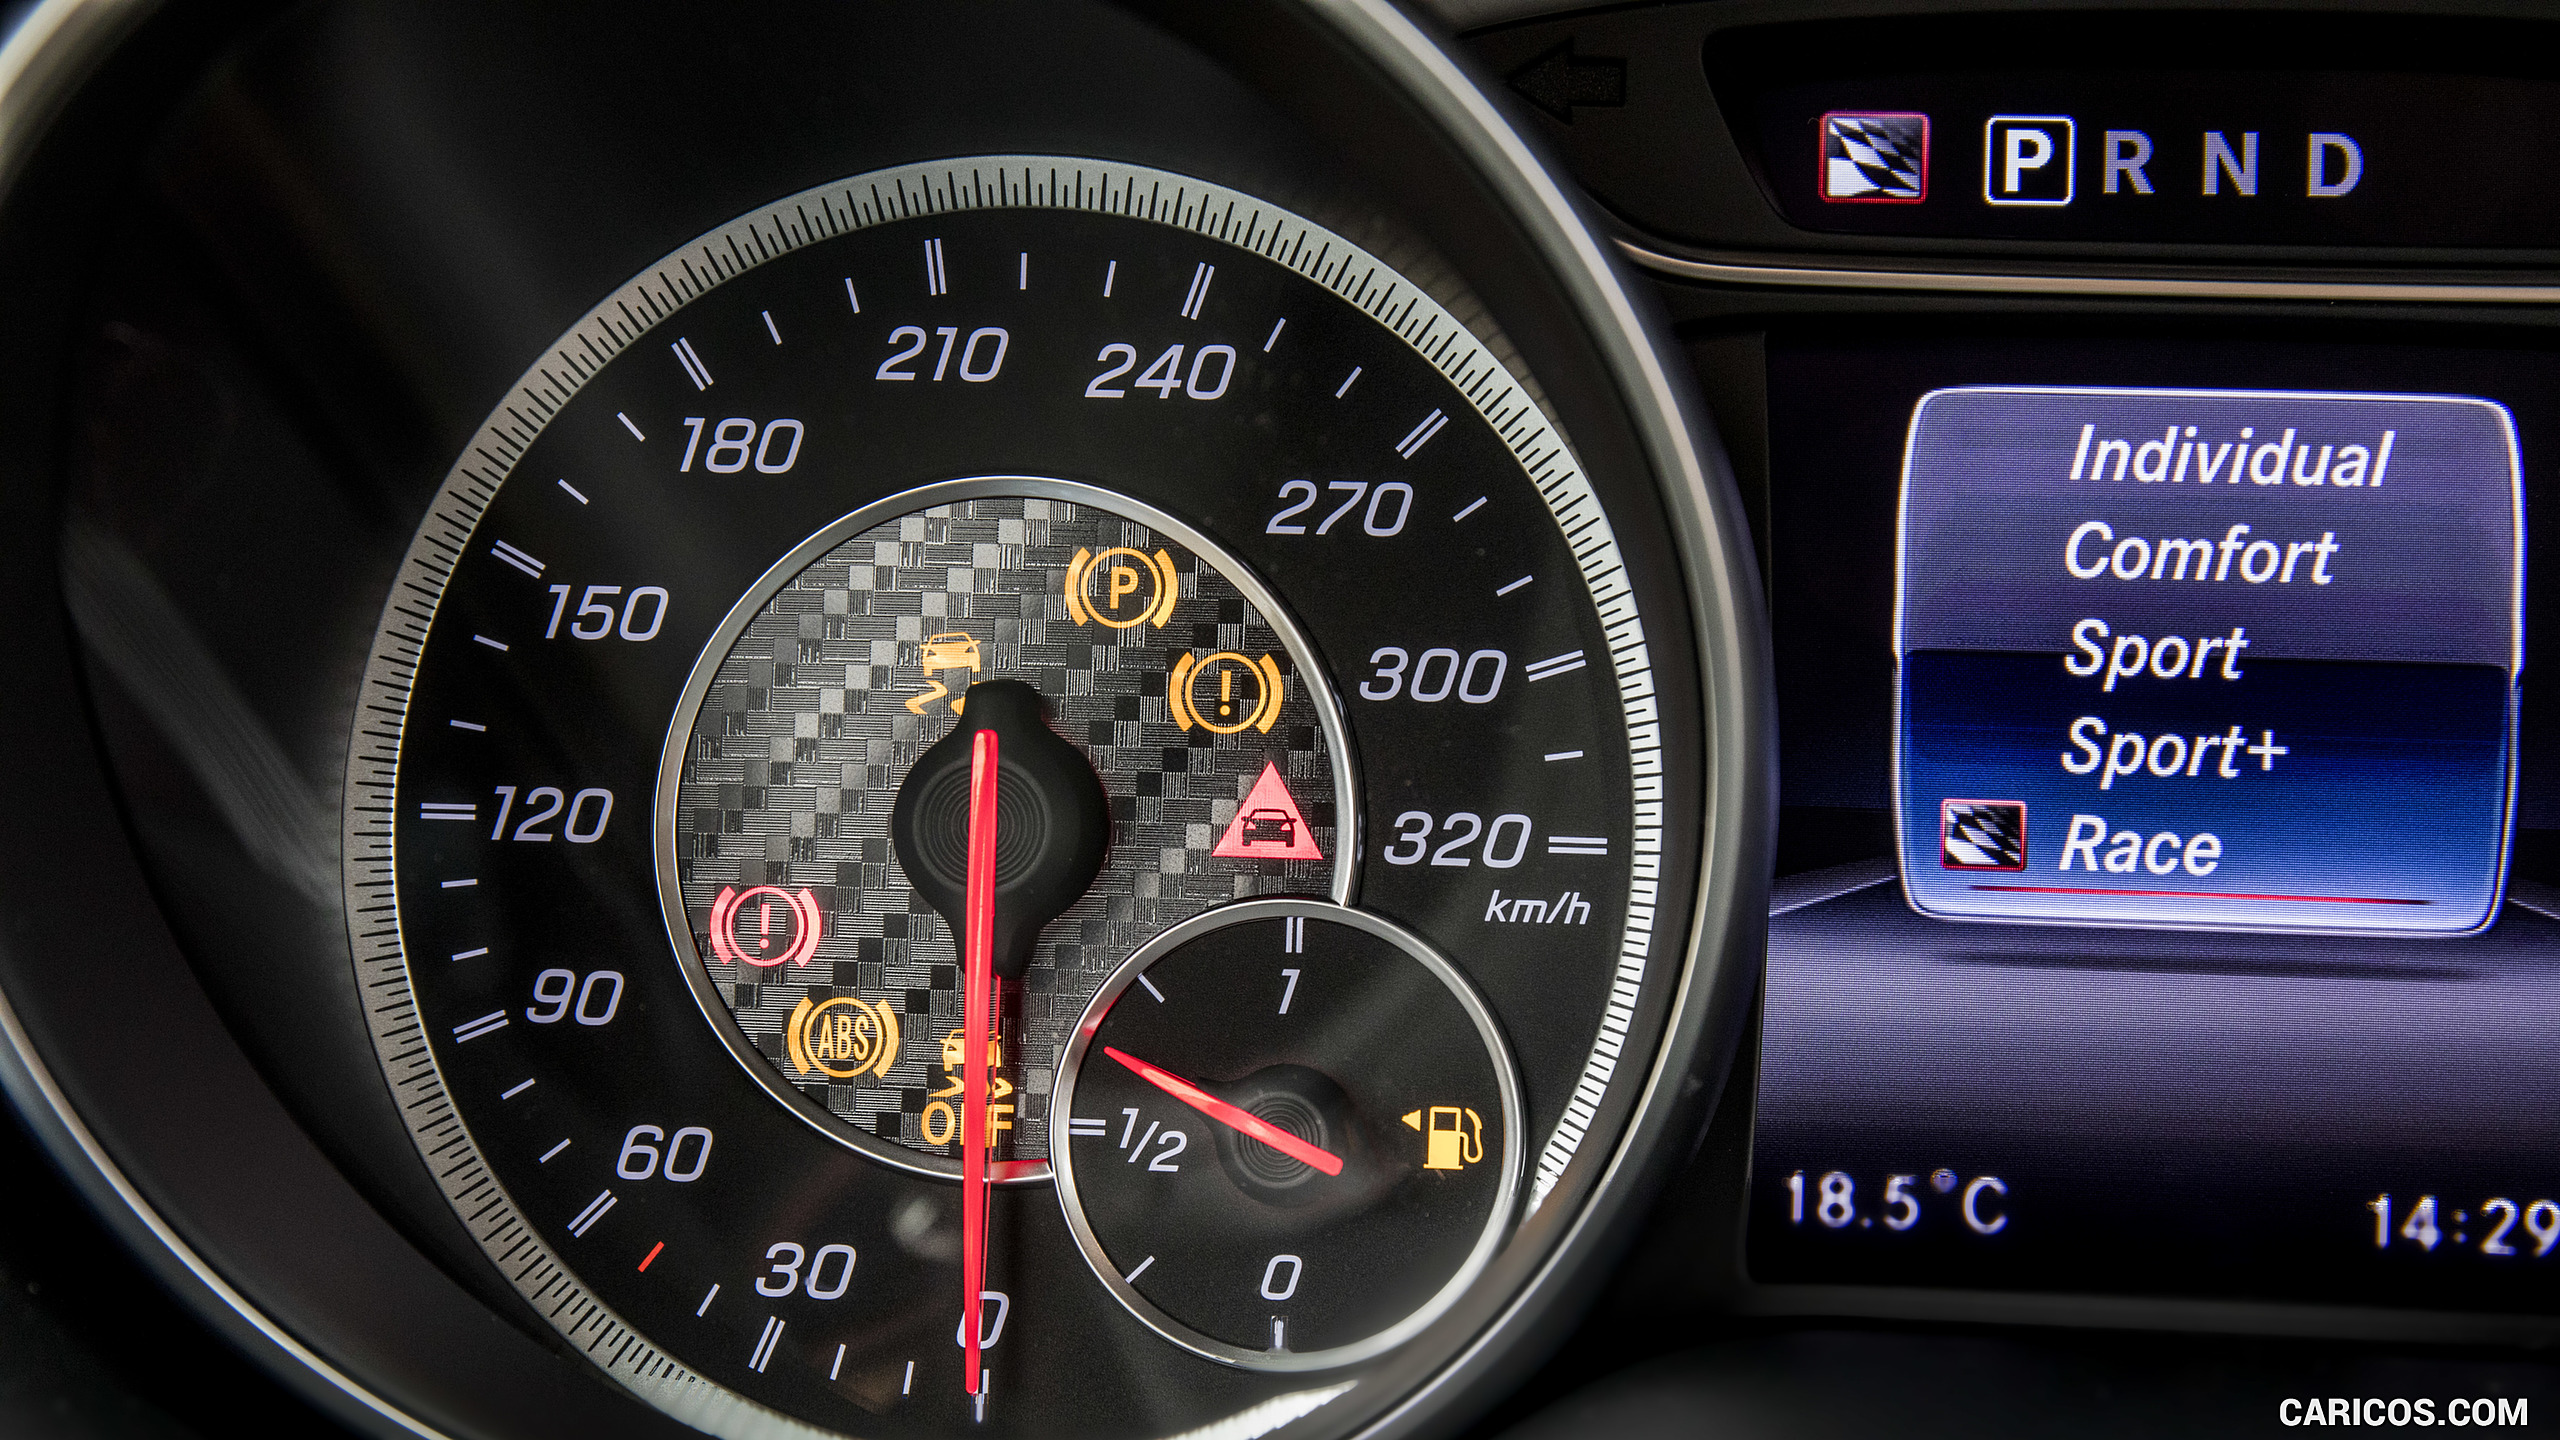 2018 Mercedes-AMG GLA 45 4MATIC - Instrument Cluster, #86 of 88